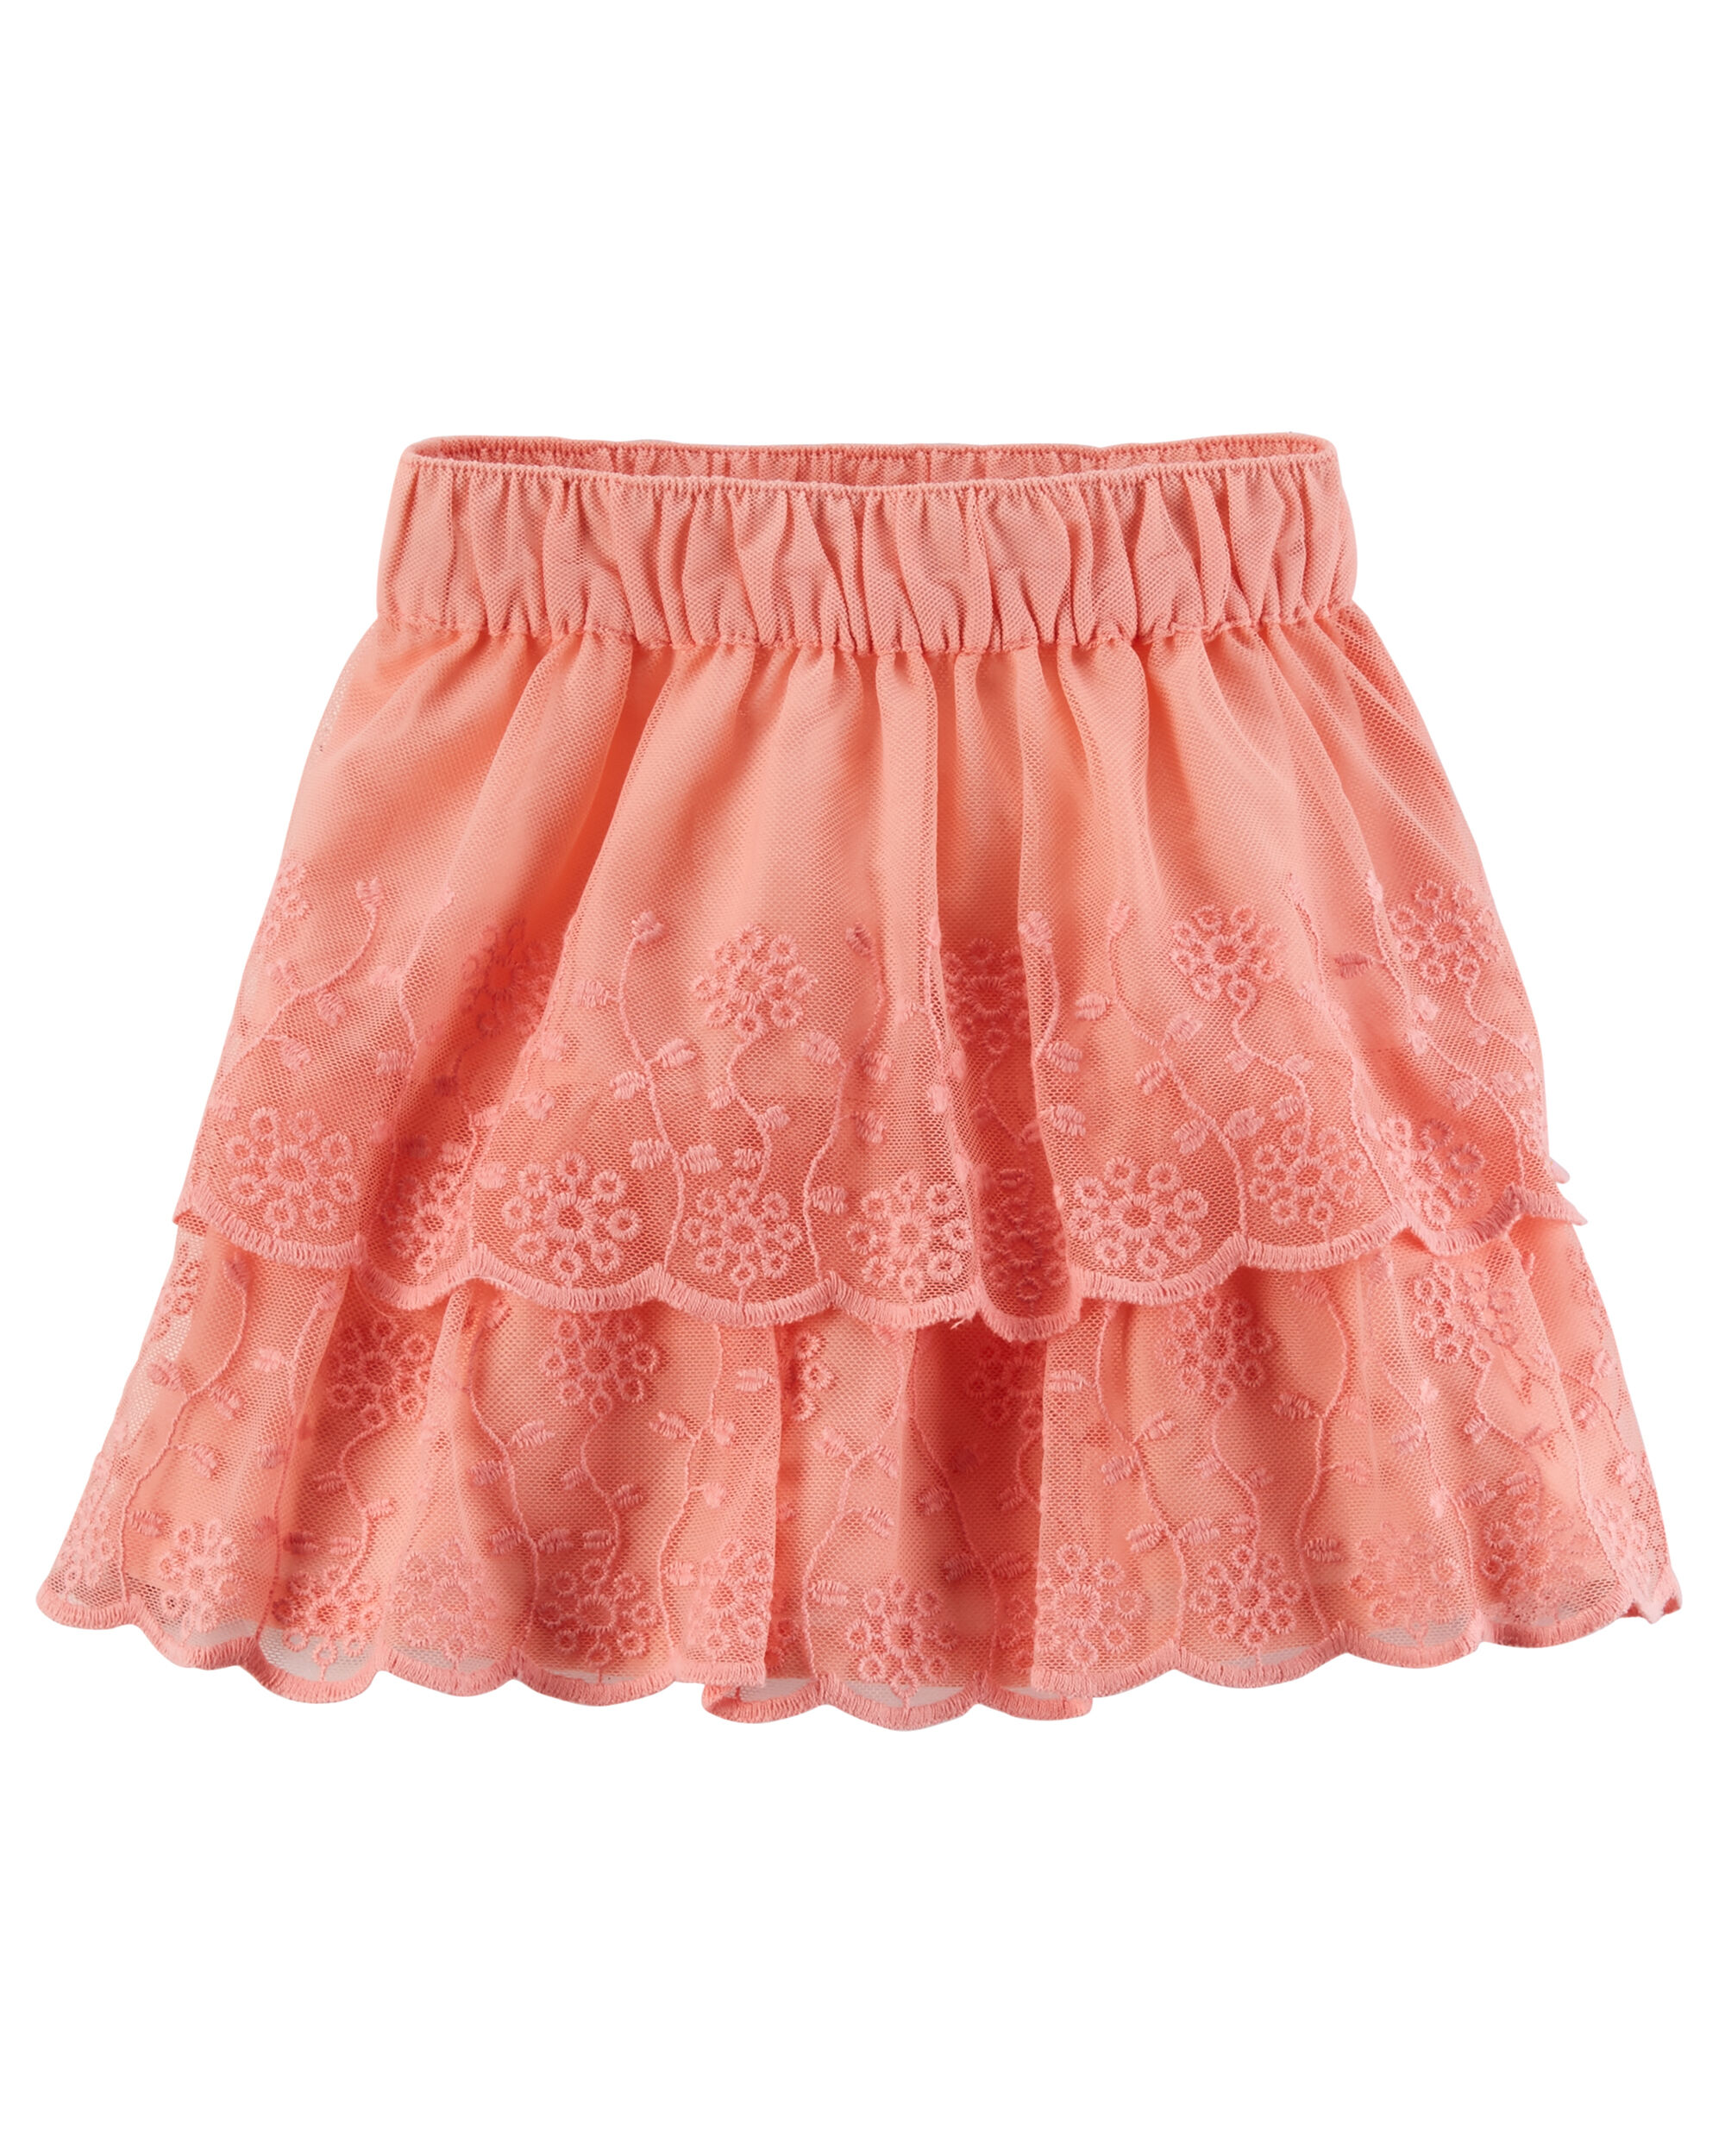 Lace Tiered Skirt | Carters.com